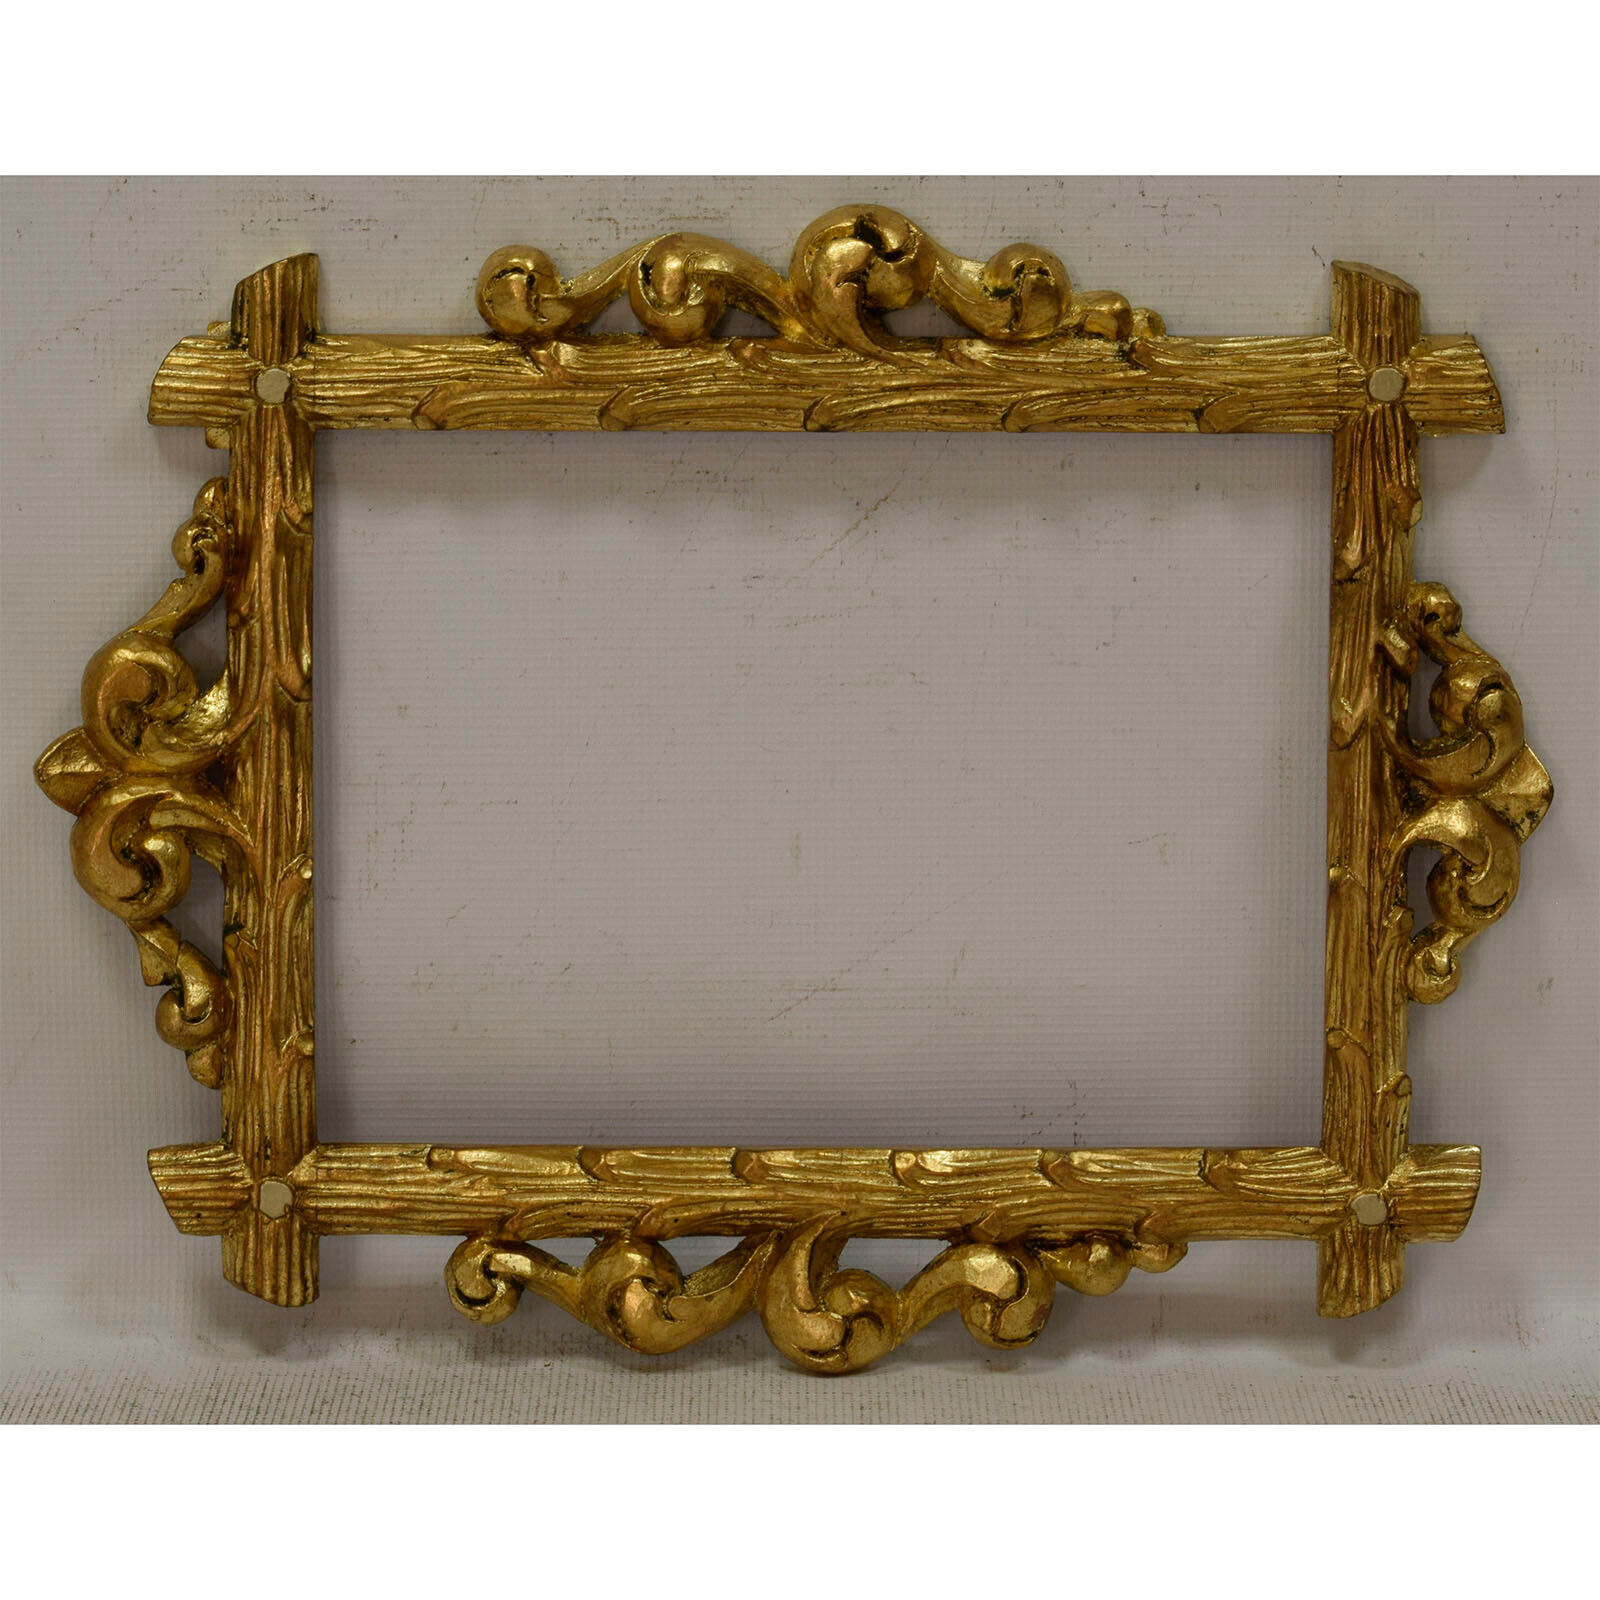 Ca 1900 Old wooden frame with metal leaf Internal: 13,1x9,6 in